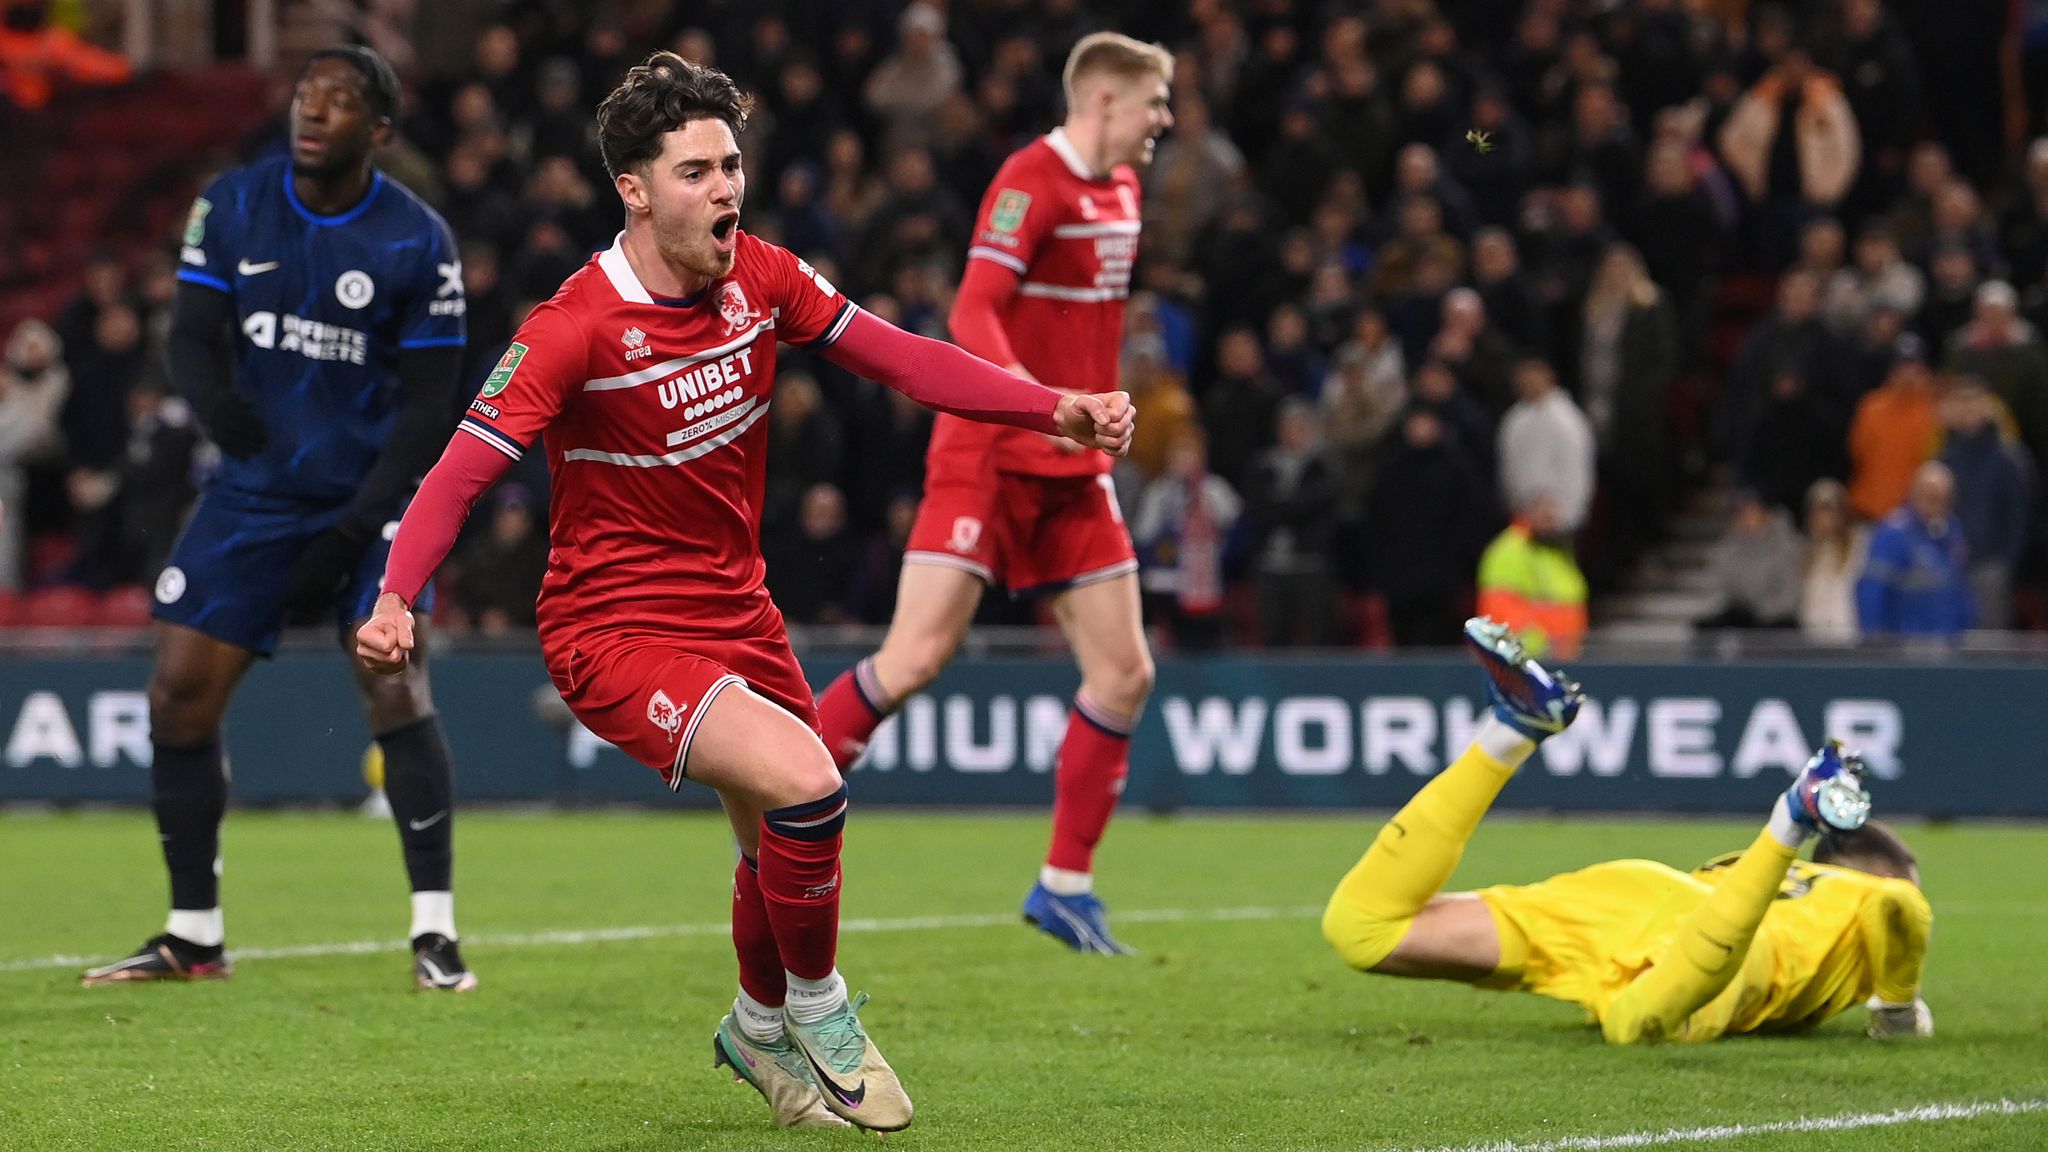 Middlesbrough beat Chelsea in first leg of Carabao Cup semi-final